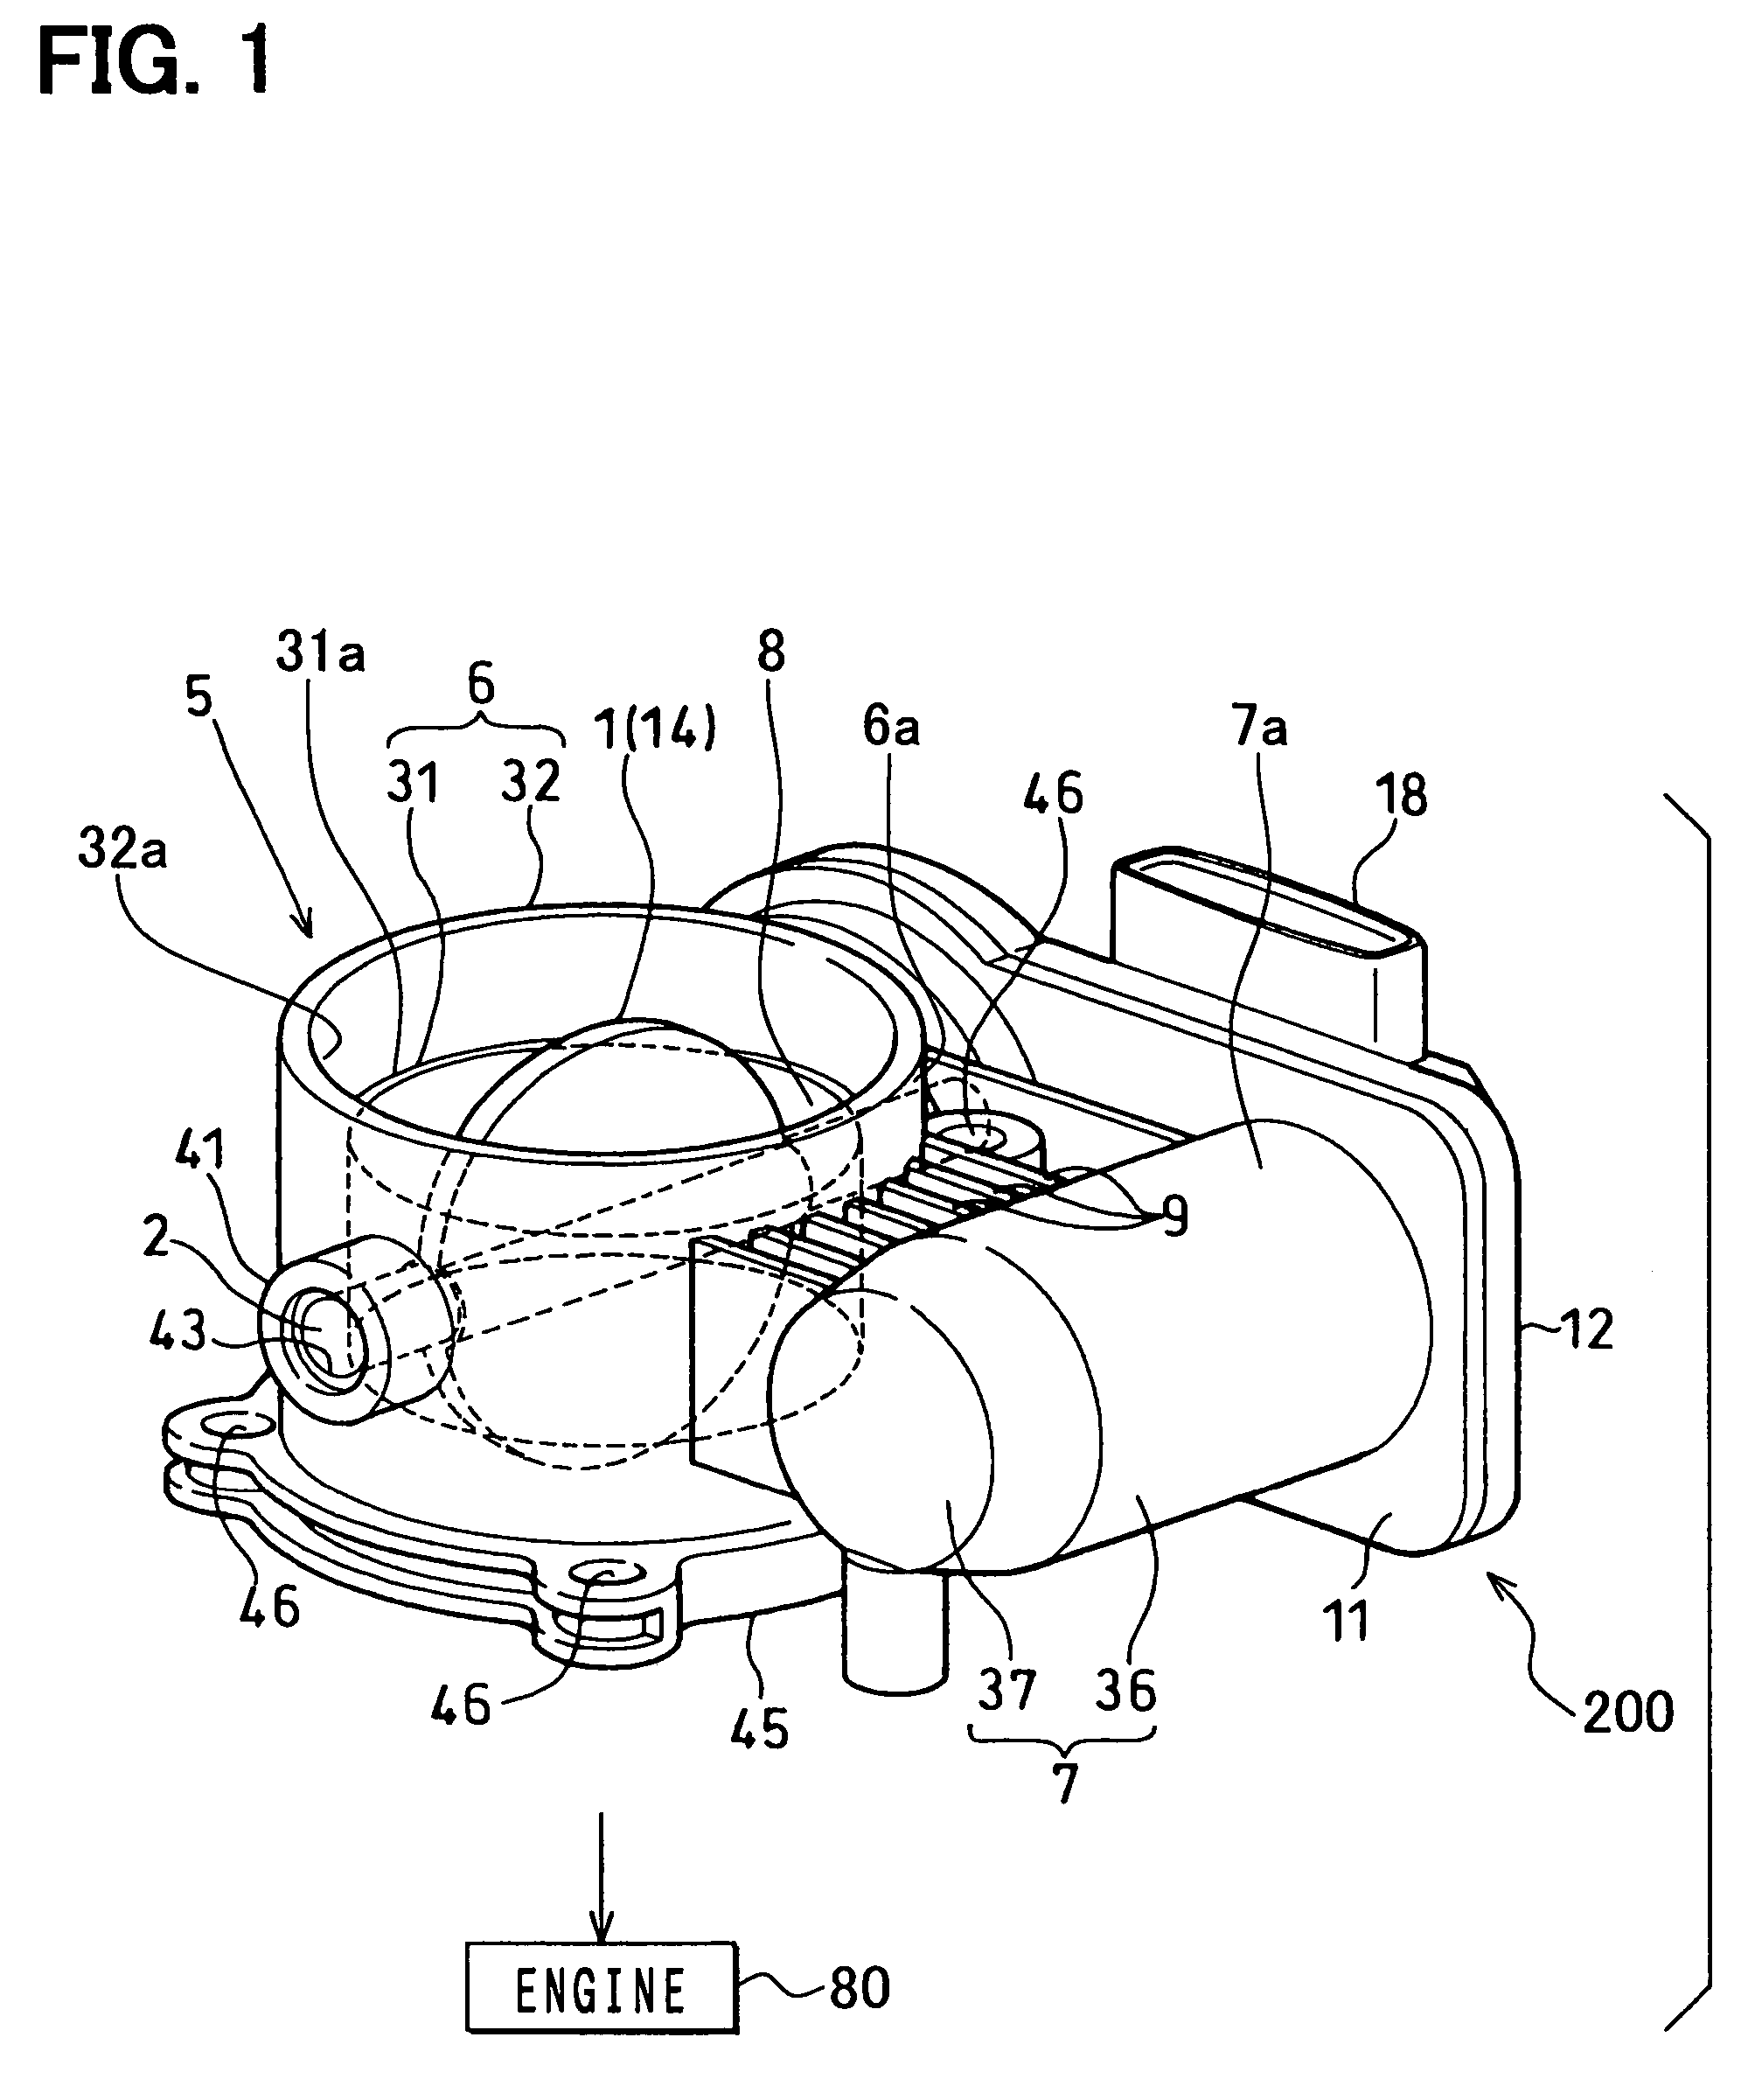 Simultaneous forming method of throttle body and throttle valve